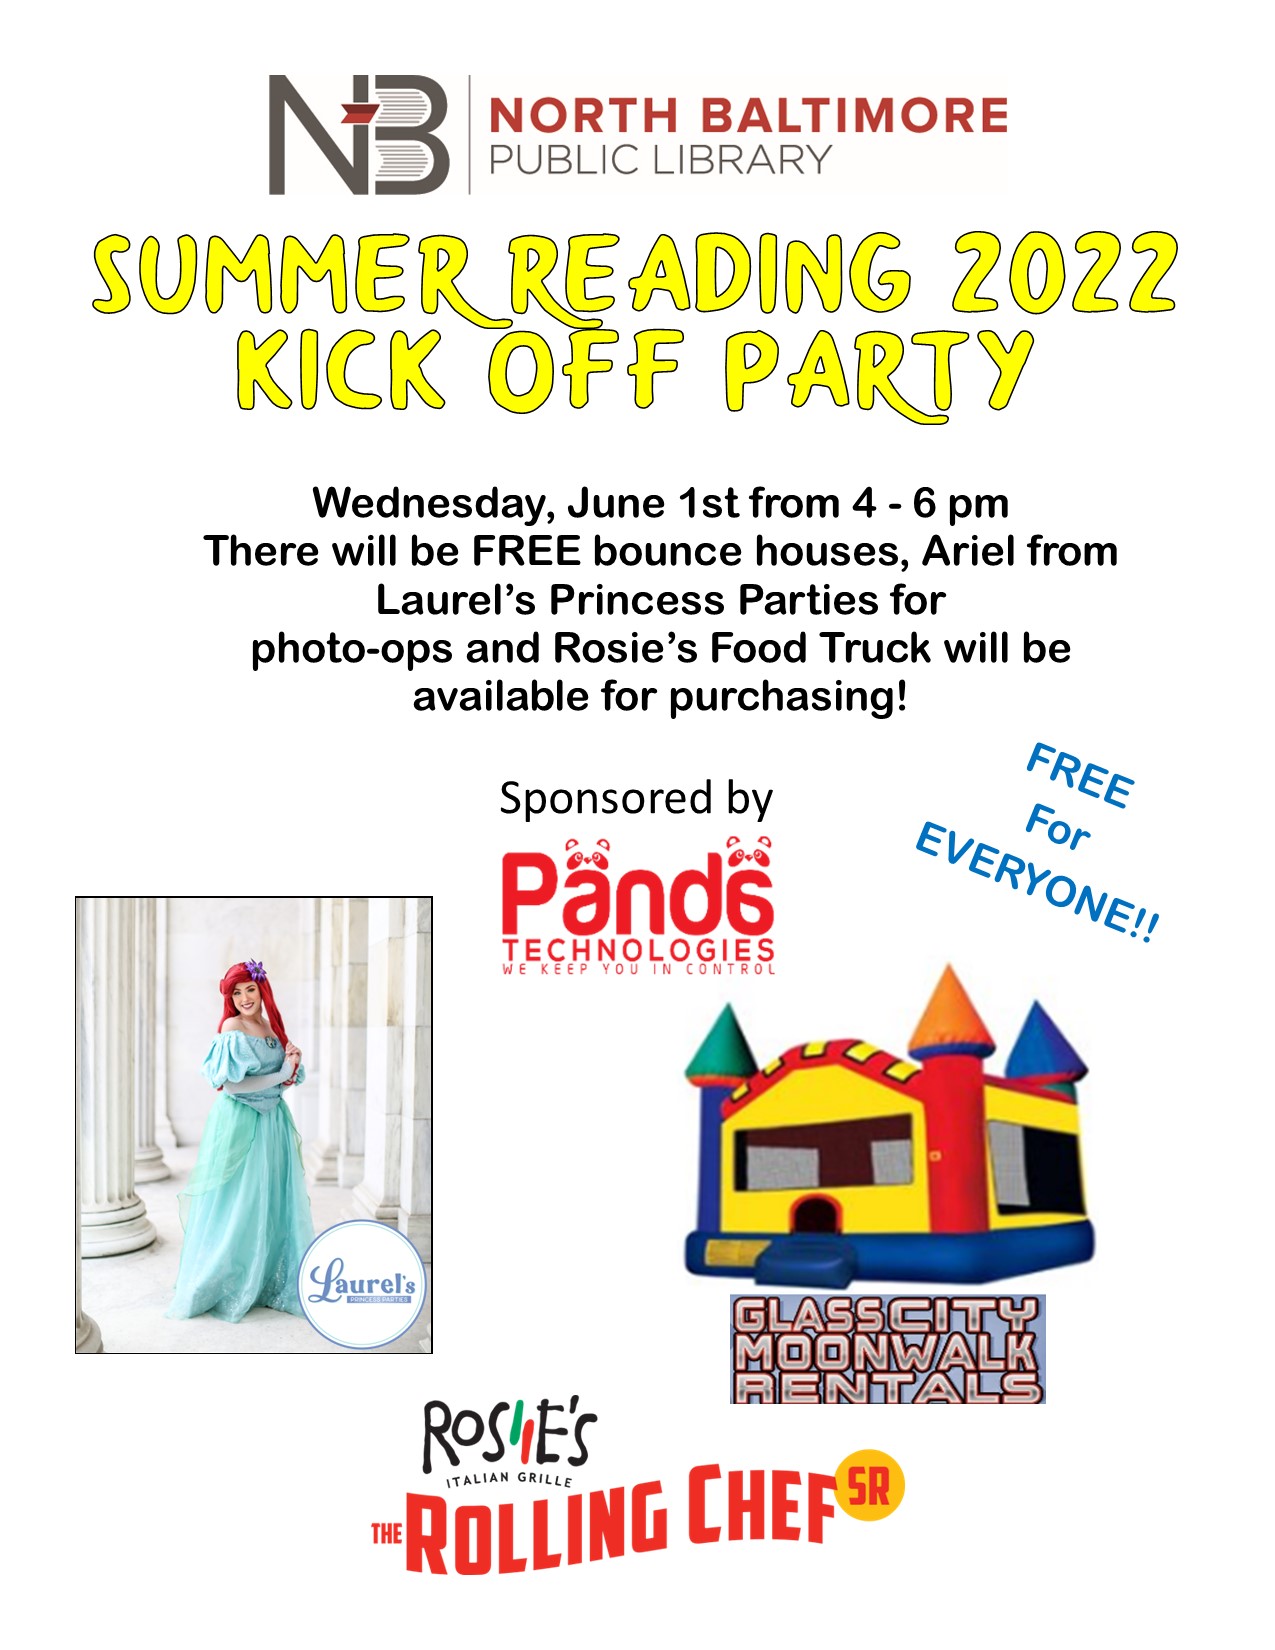 Summer Reading Kick-off party June 1st 4-6